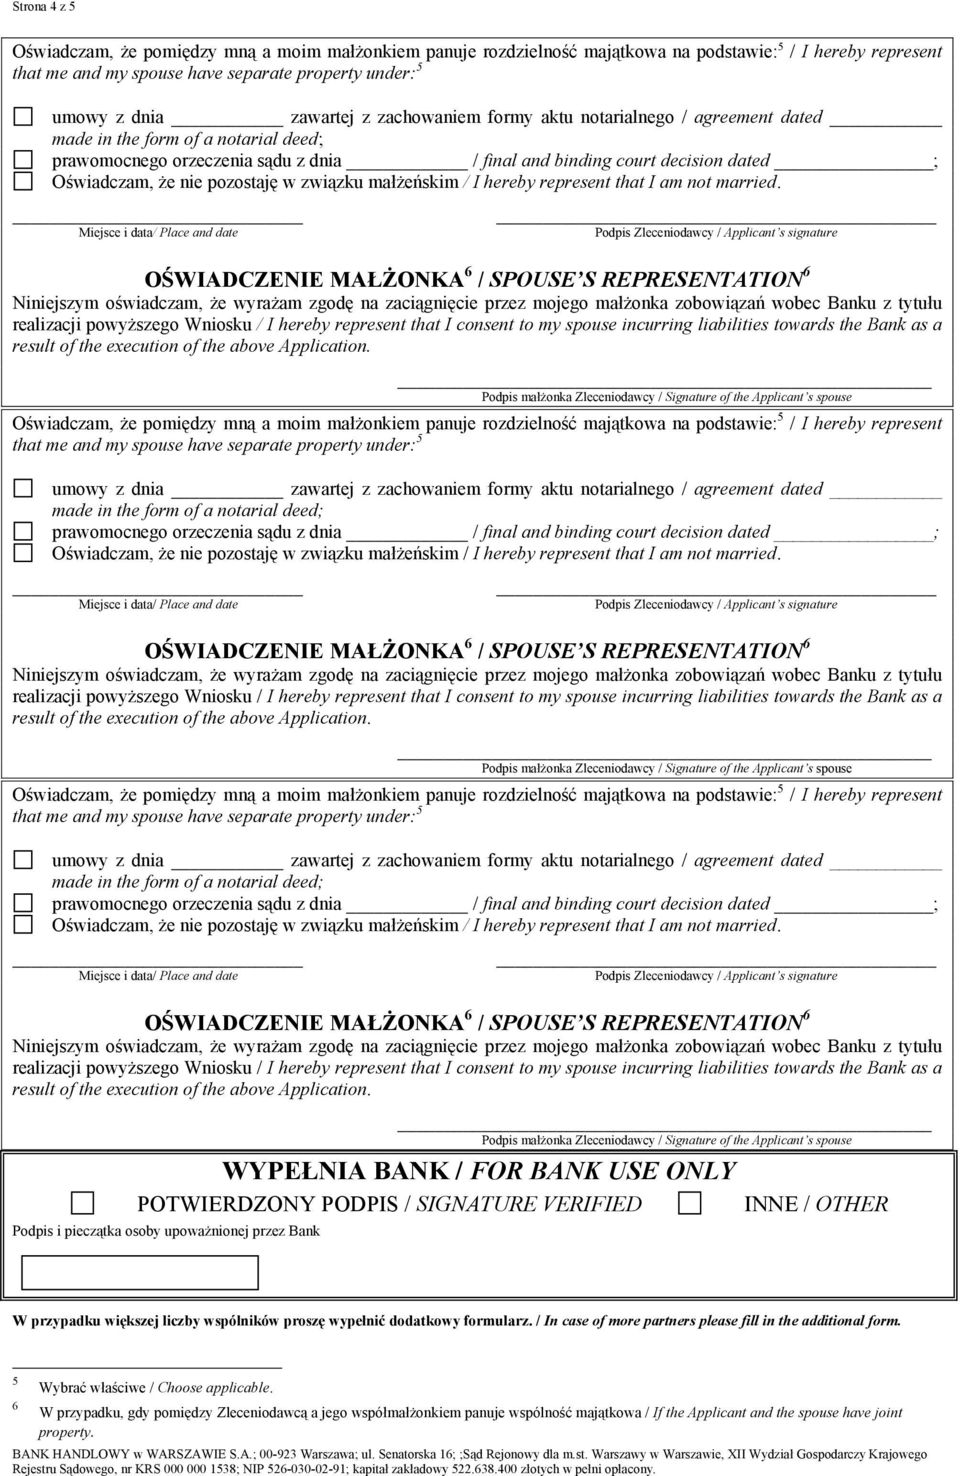 / In case of more partners please fill in the additional form. 5 6 Wybrać właściwe / Choose applicable.